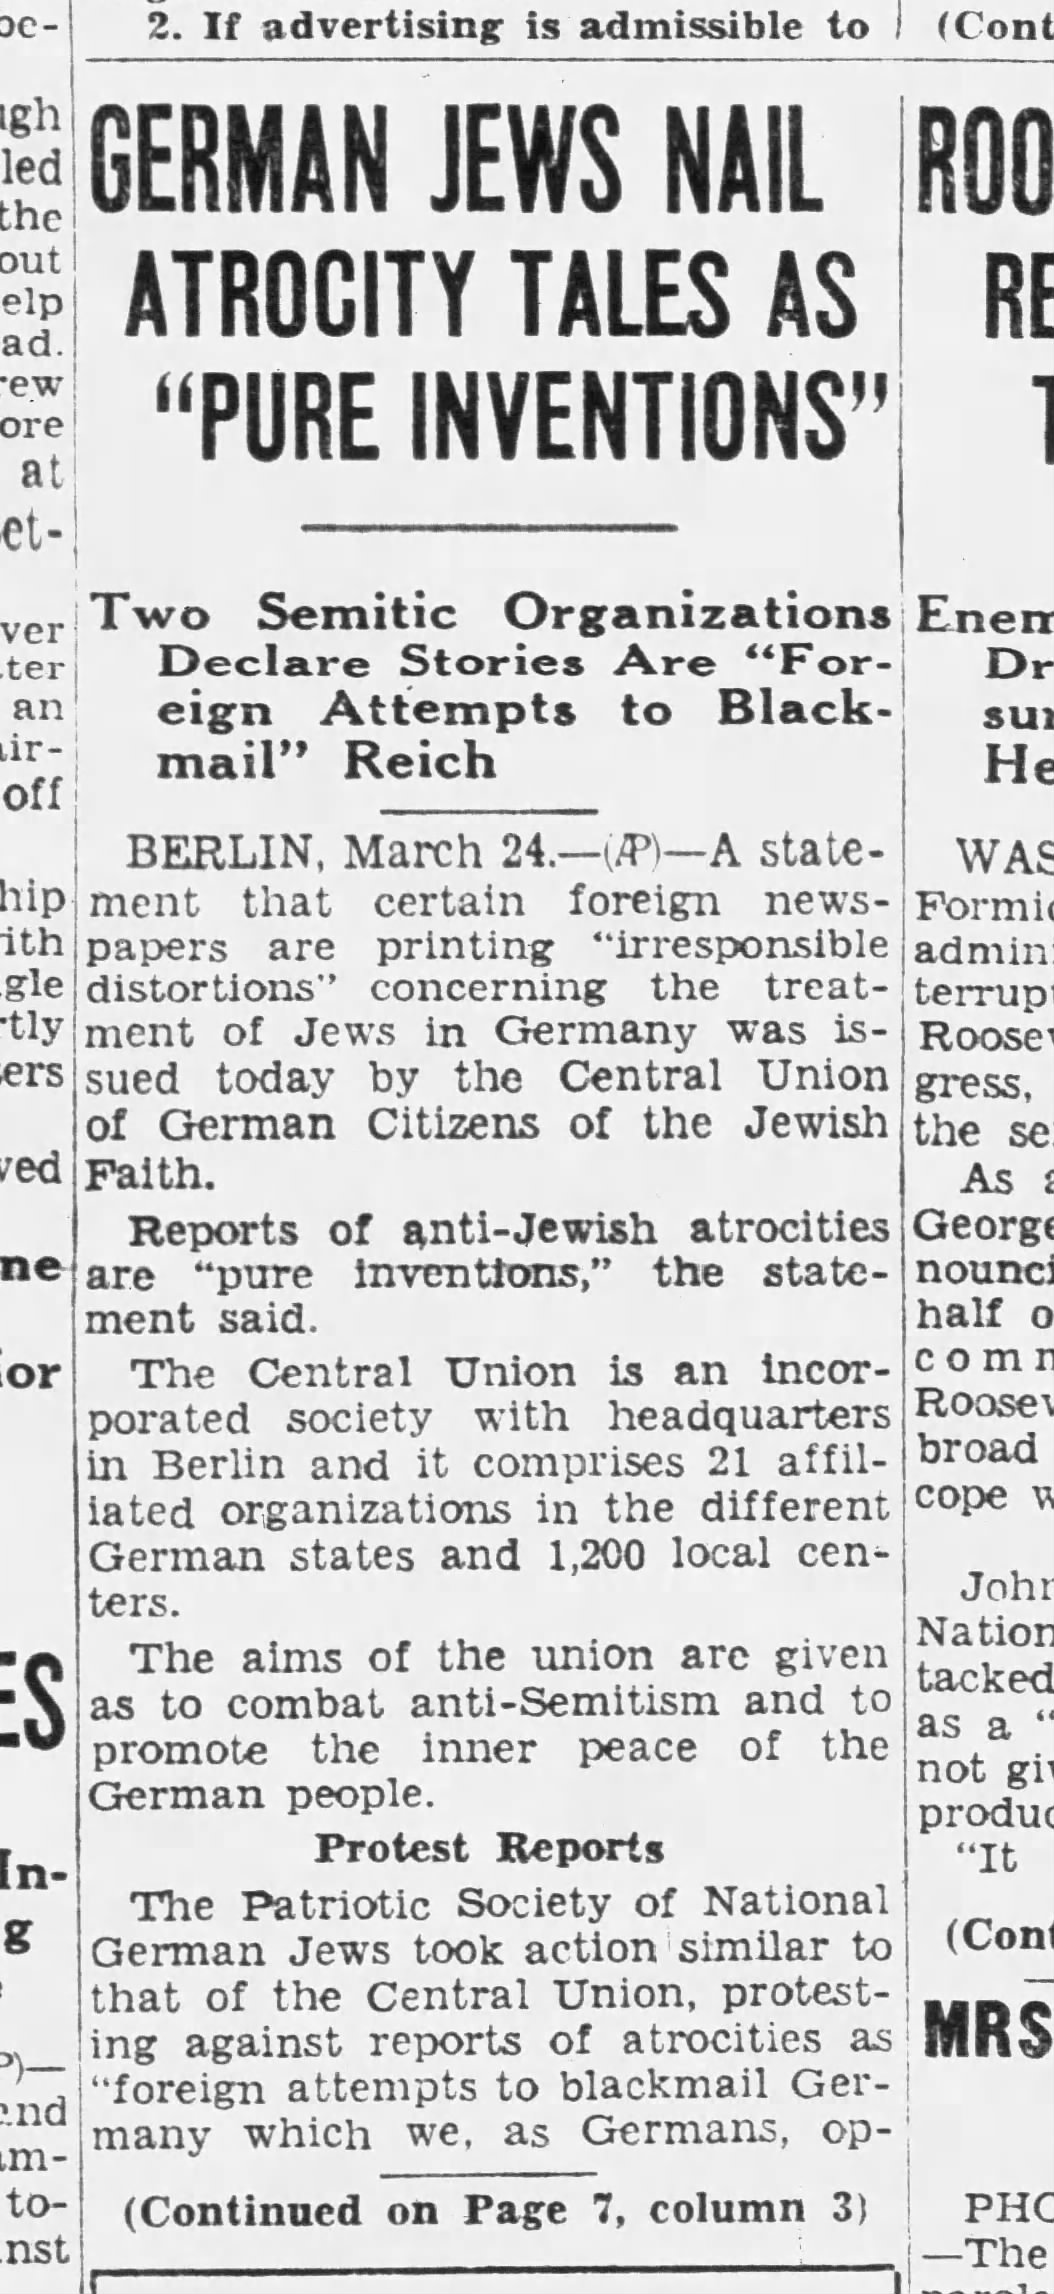 German Jews Nail Atrocity Tales As "Pure Inventions"